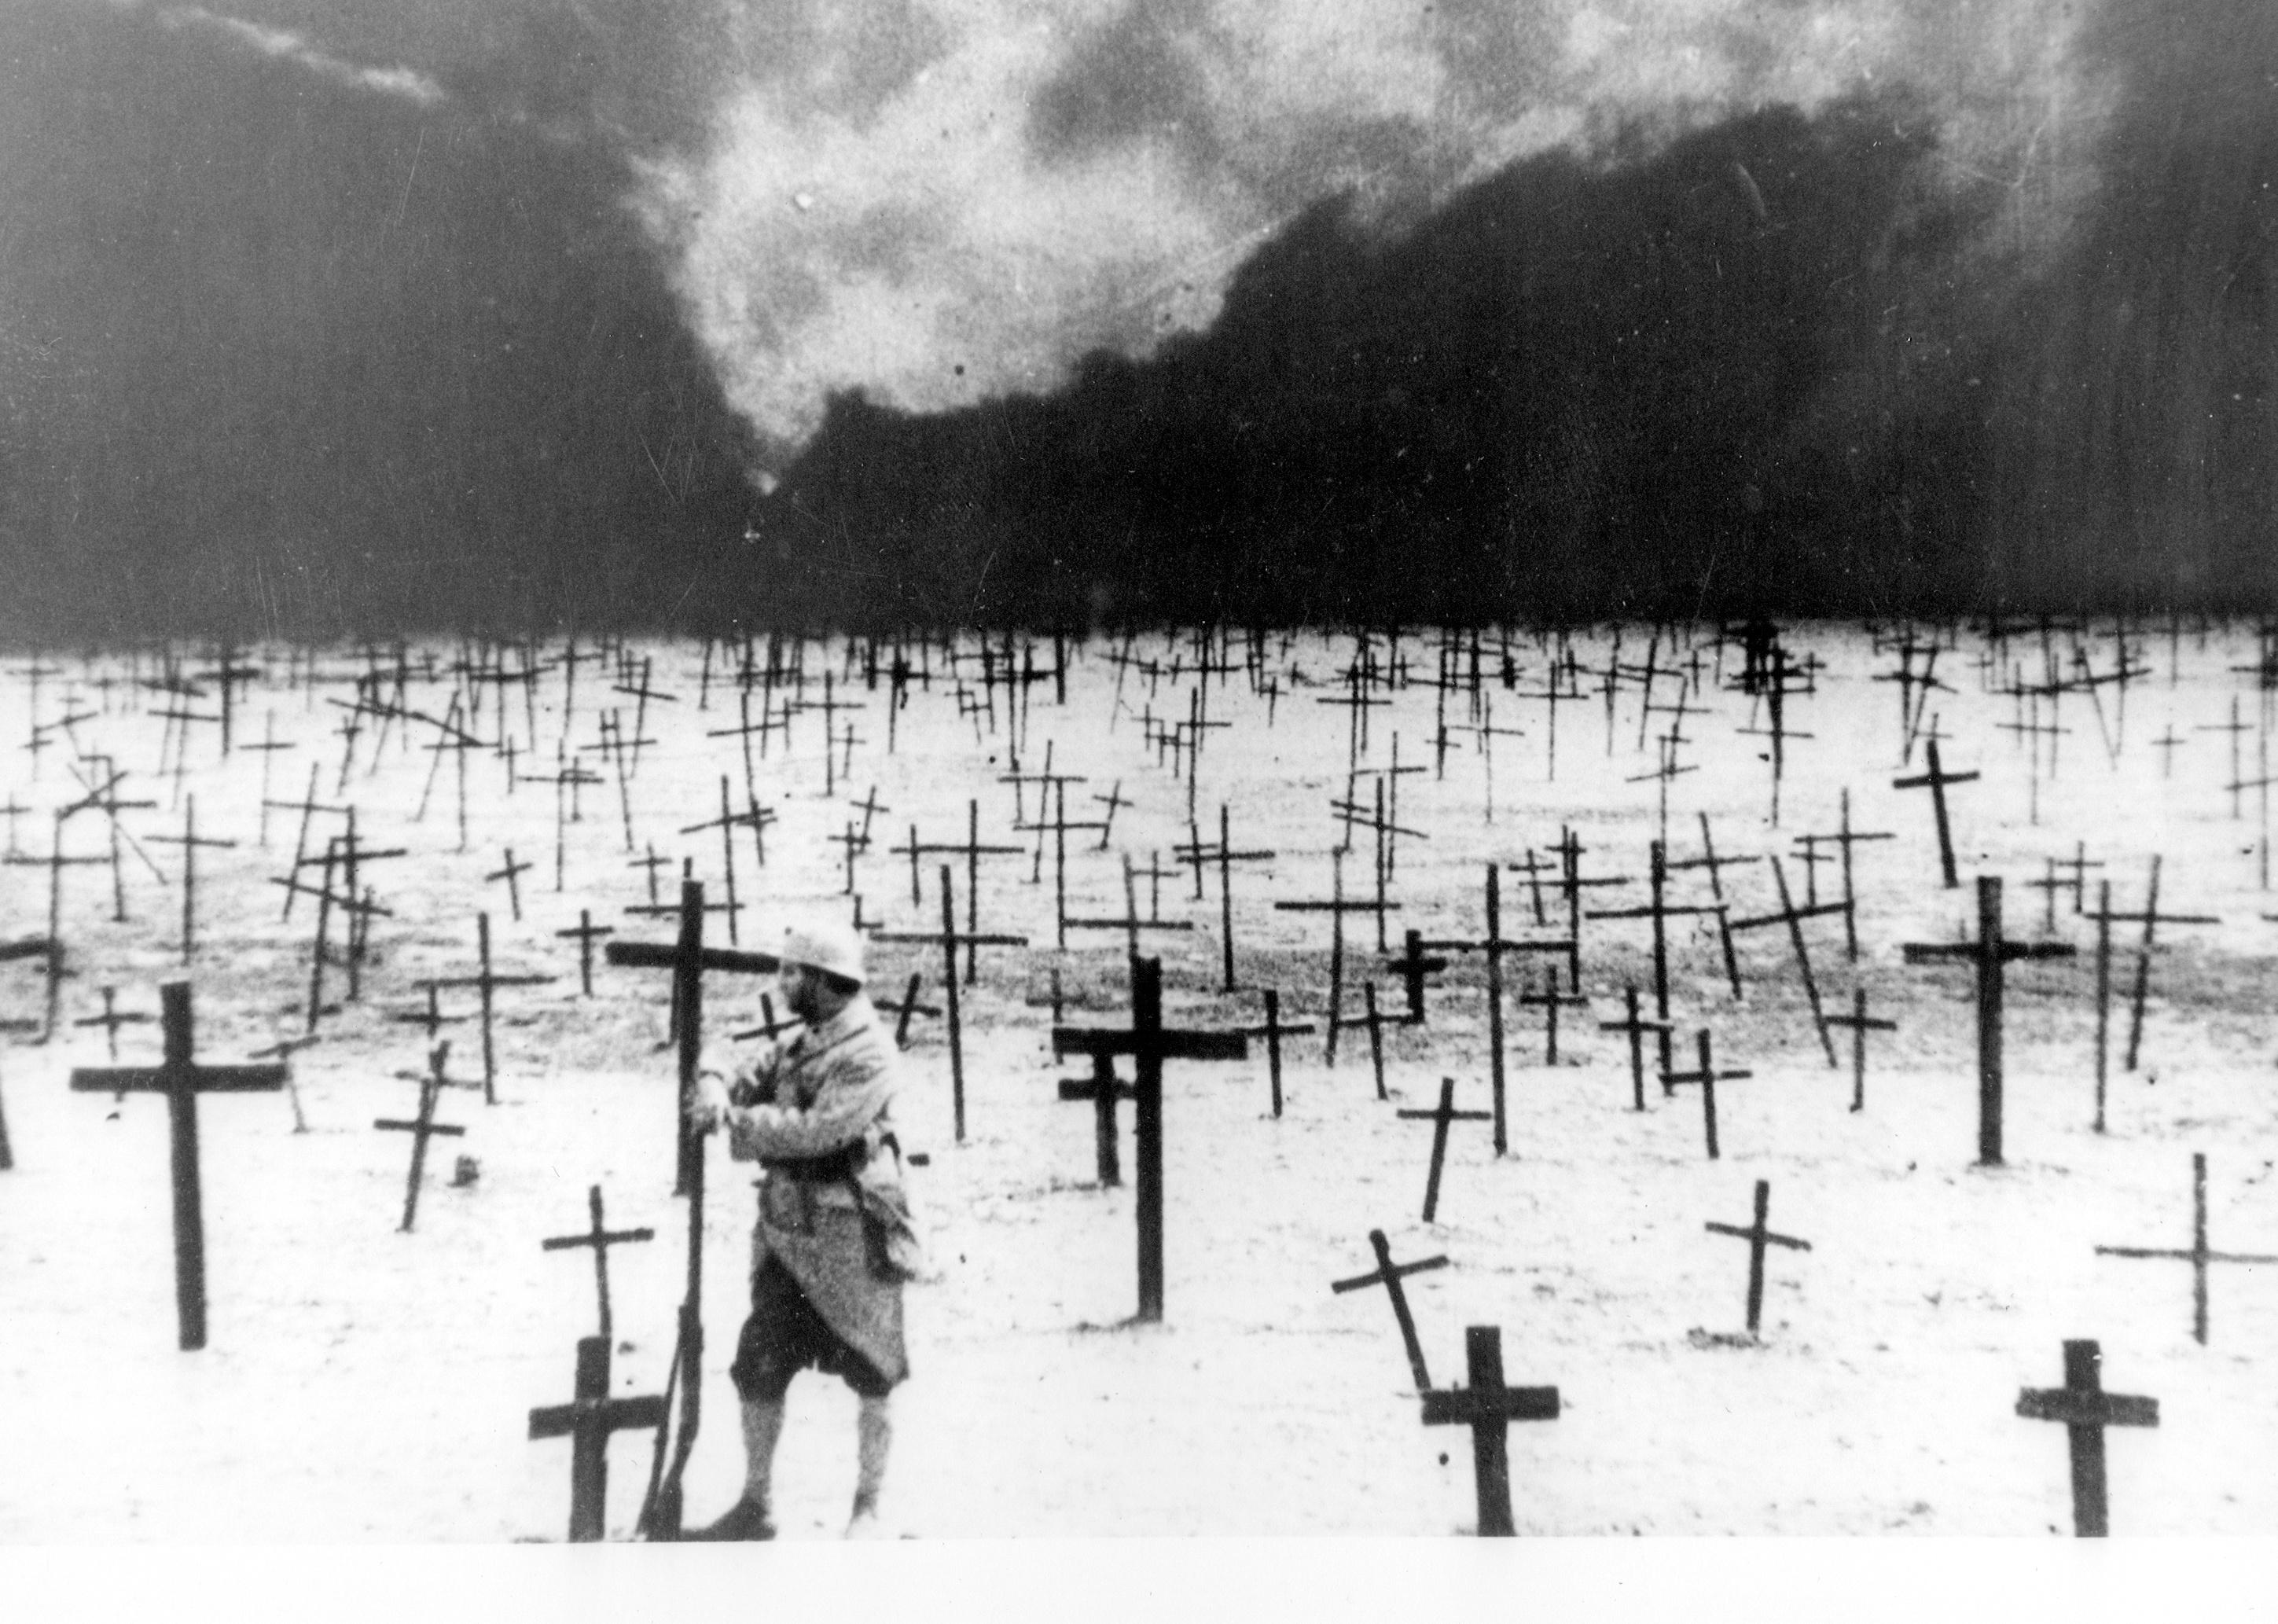 A man standing next to an endless field of crosses in the ground.